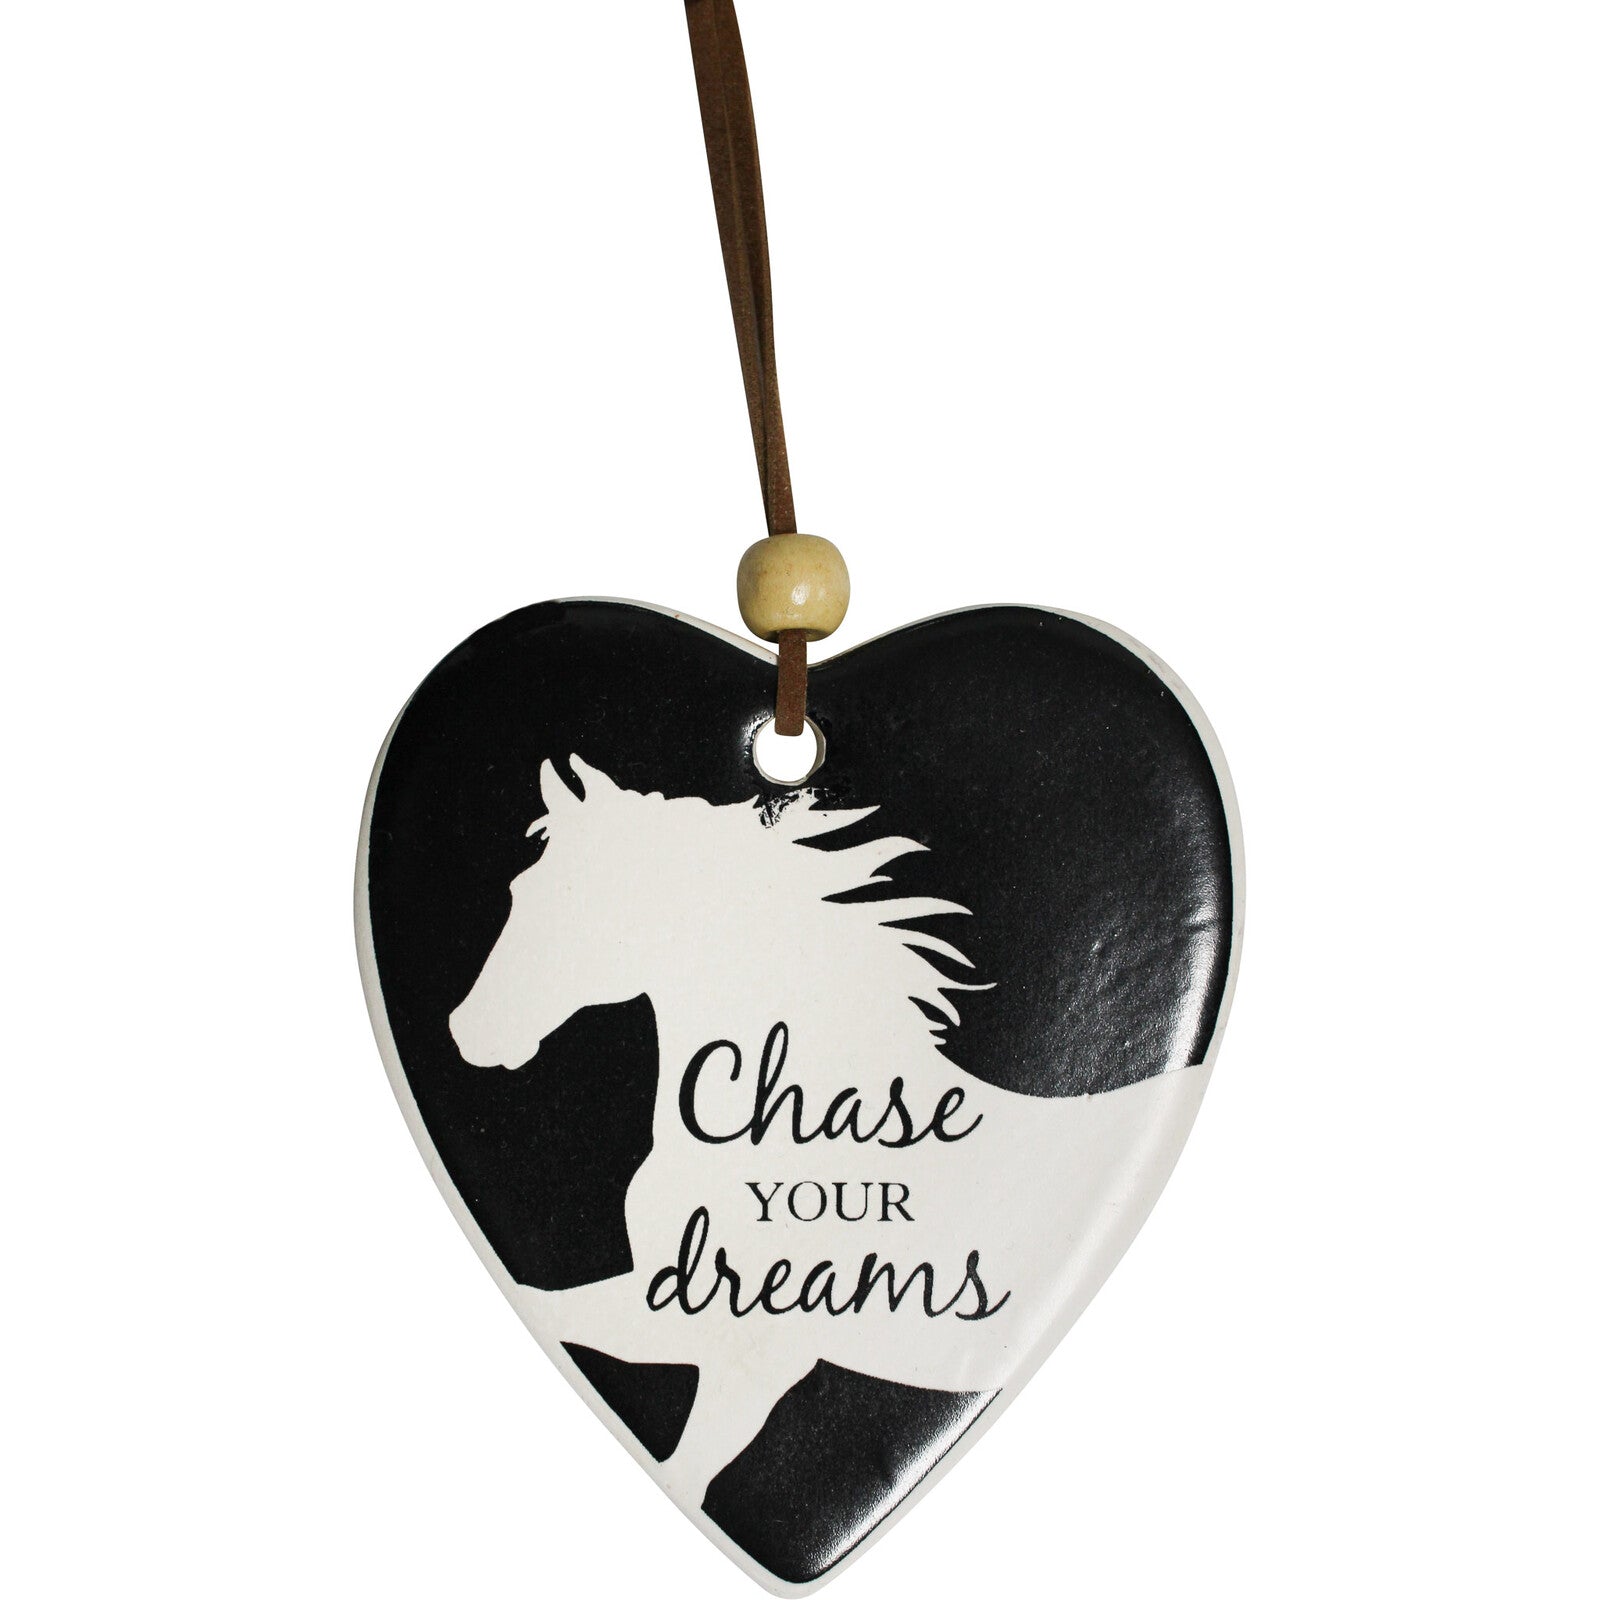 'Chase Your Dreams' Ceramic Heart